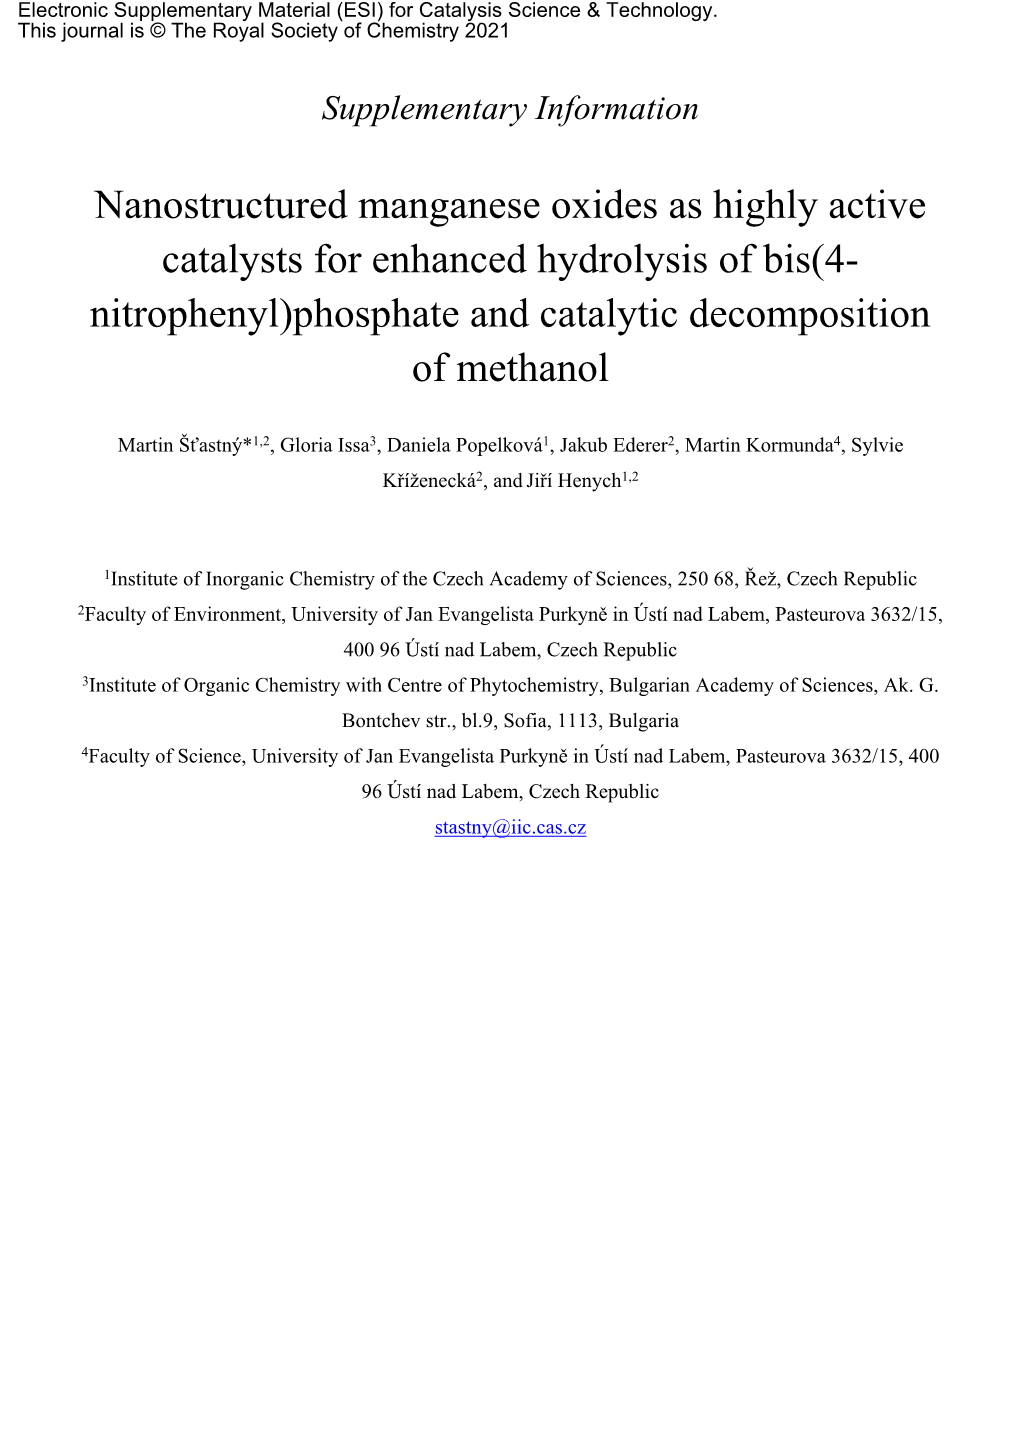 Nanostructured Manganese Oxides As Highly Active Catalysts for Enhanced Hydrolysis of Bis(4- Nitrophenyl)Phosphate and Catalytic Decomposition of Methanol